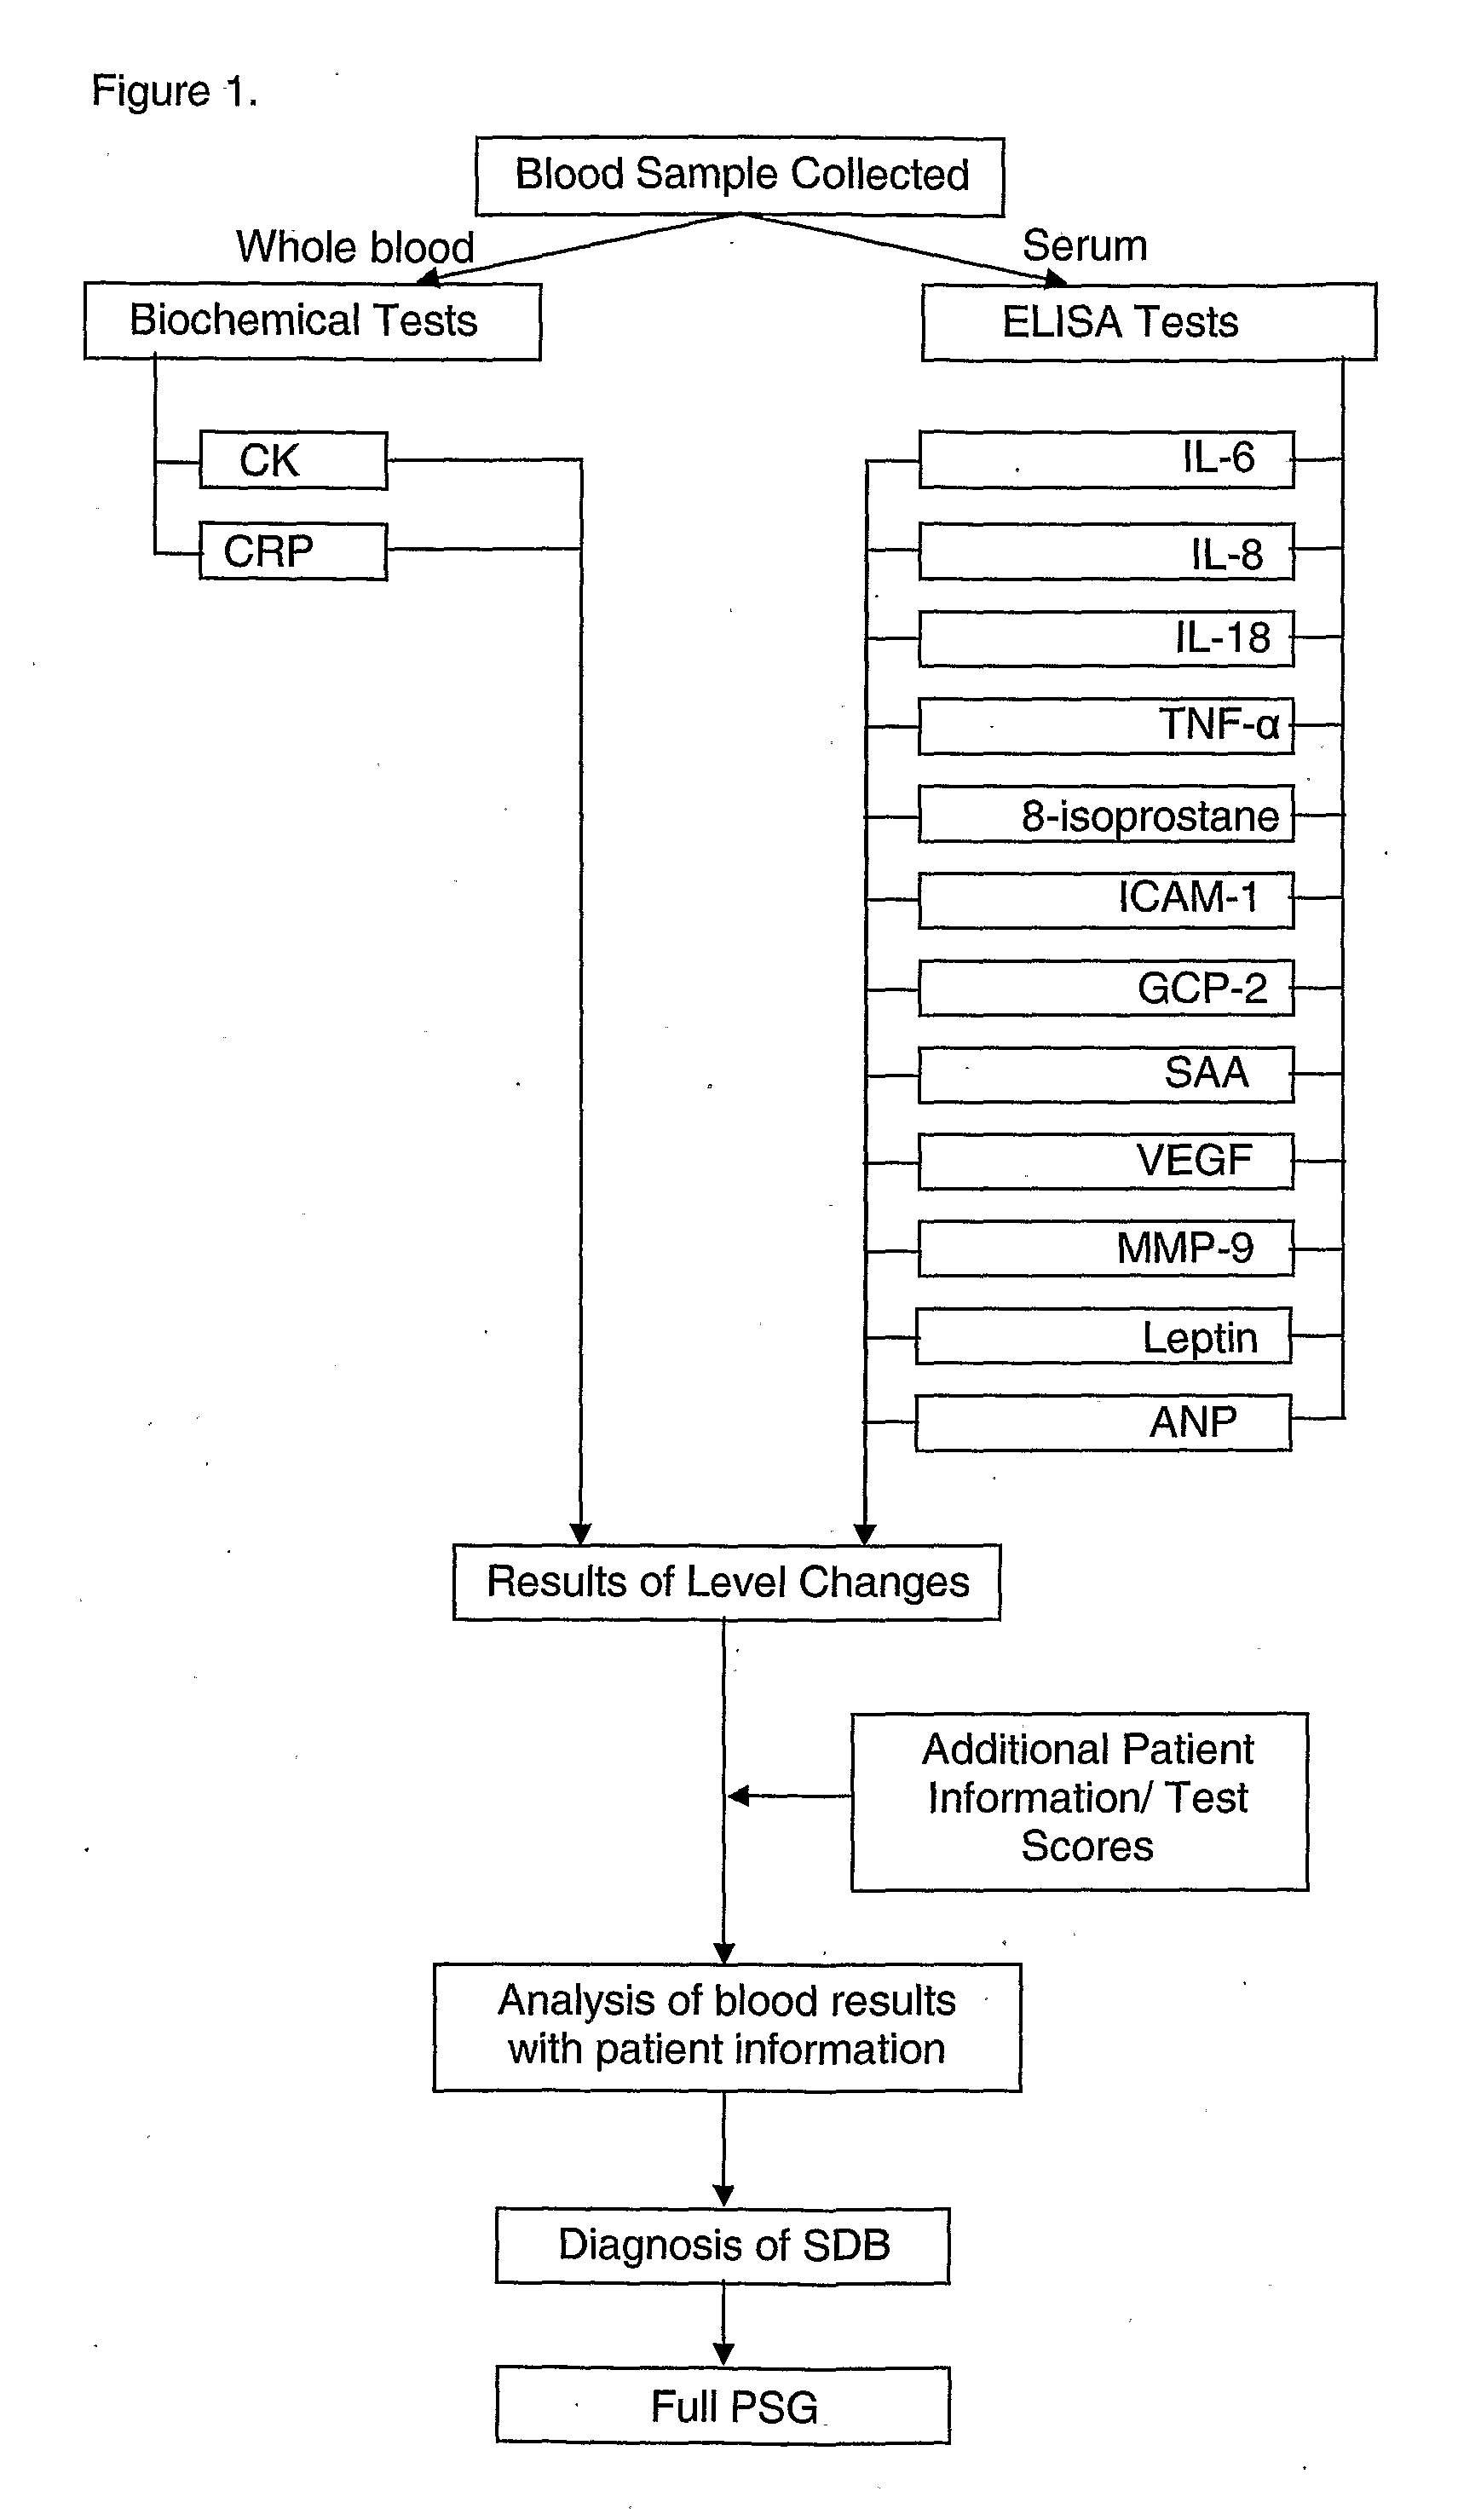 Blood protein markers in methods and apparatuses to aid diagnosis and management of sleep disordered breathing